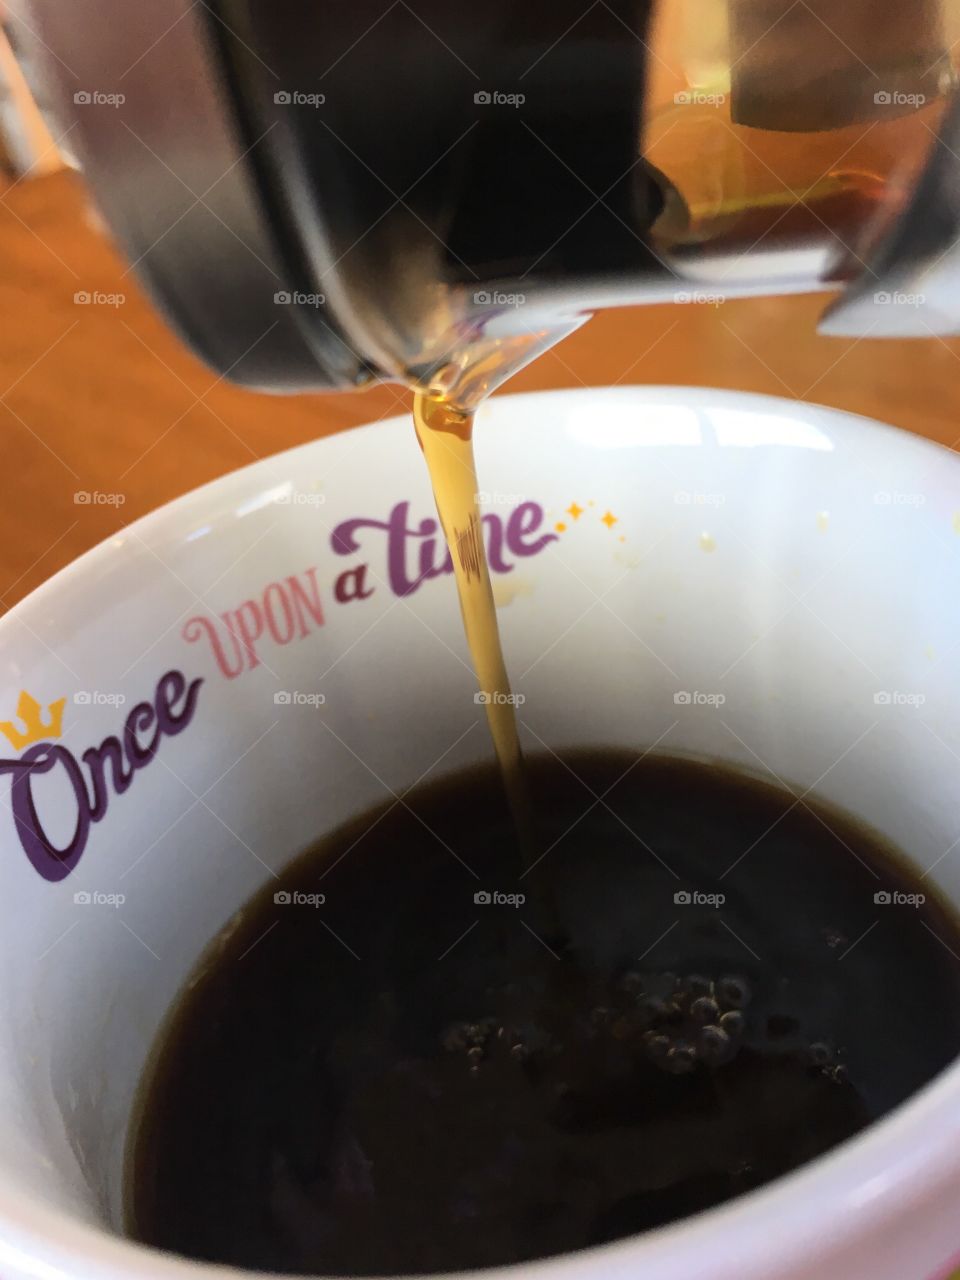 French press black coffee being poured into white ceramic mug that says 'once upon a time'